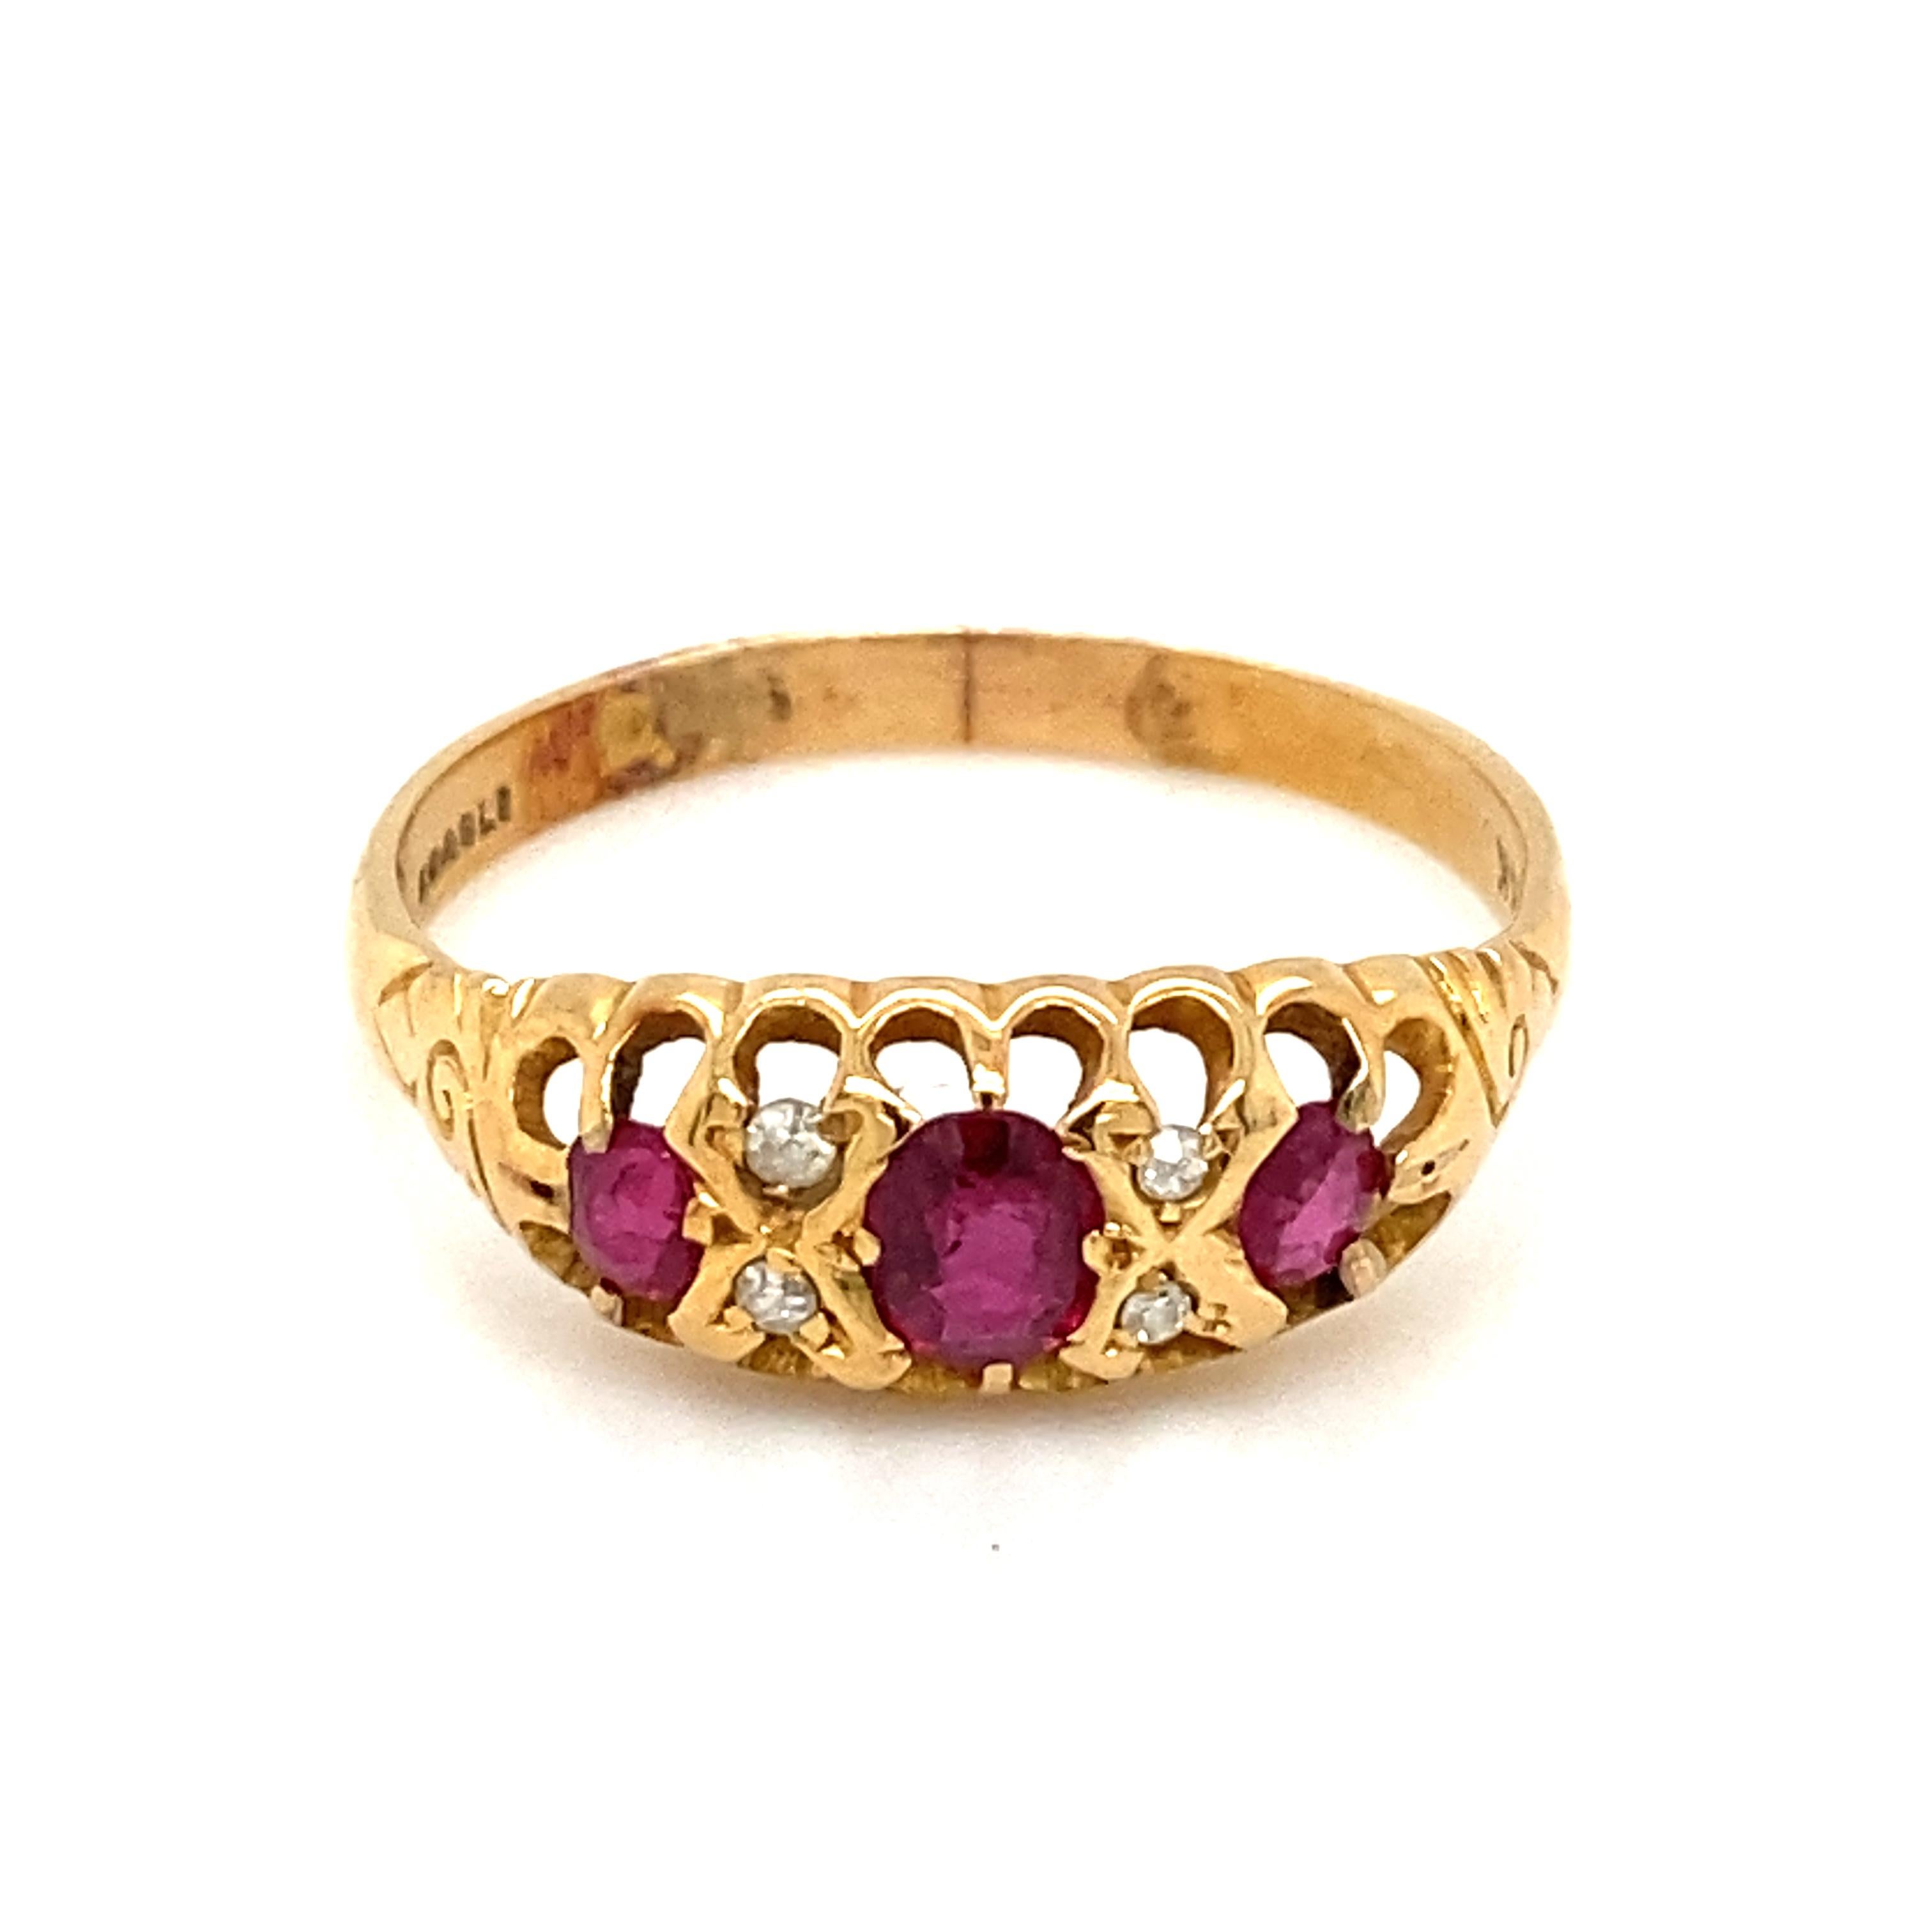 Circa 1910s Edwardian Oval Ruby and Diamond Ring in 14 Karat Yellow Gold In Excellent Condition For Sale In Atlanta, GA